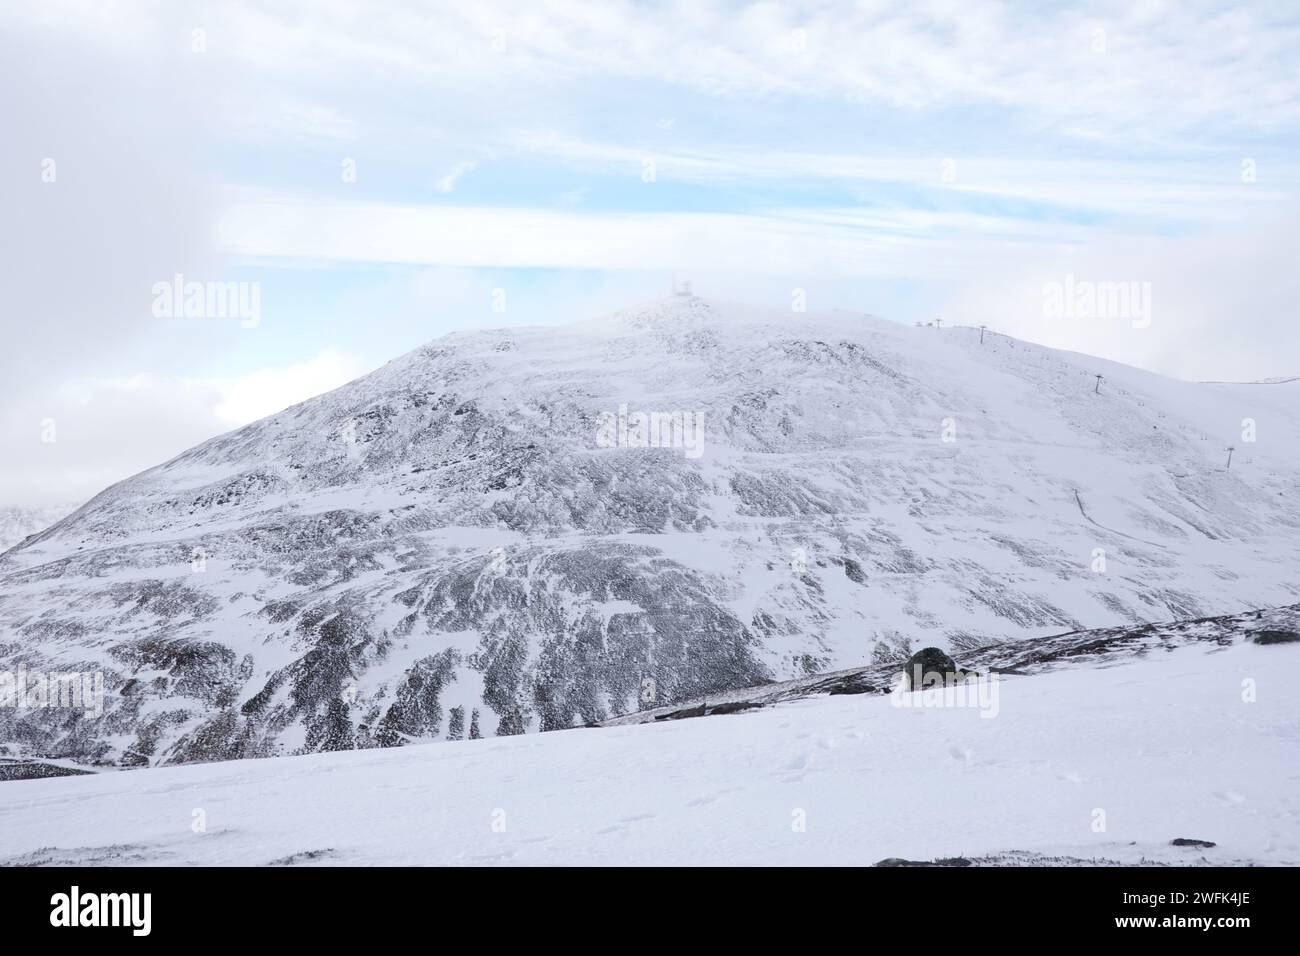 The Cairnwell Glenshee, a Munro Mountain in Cairngorms, Scotland Stock Photo